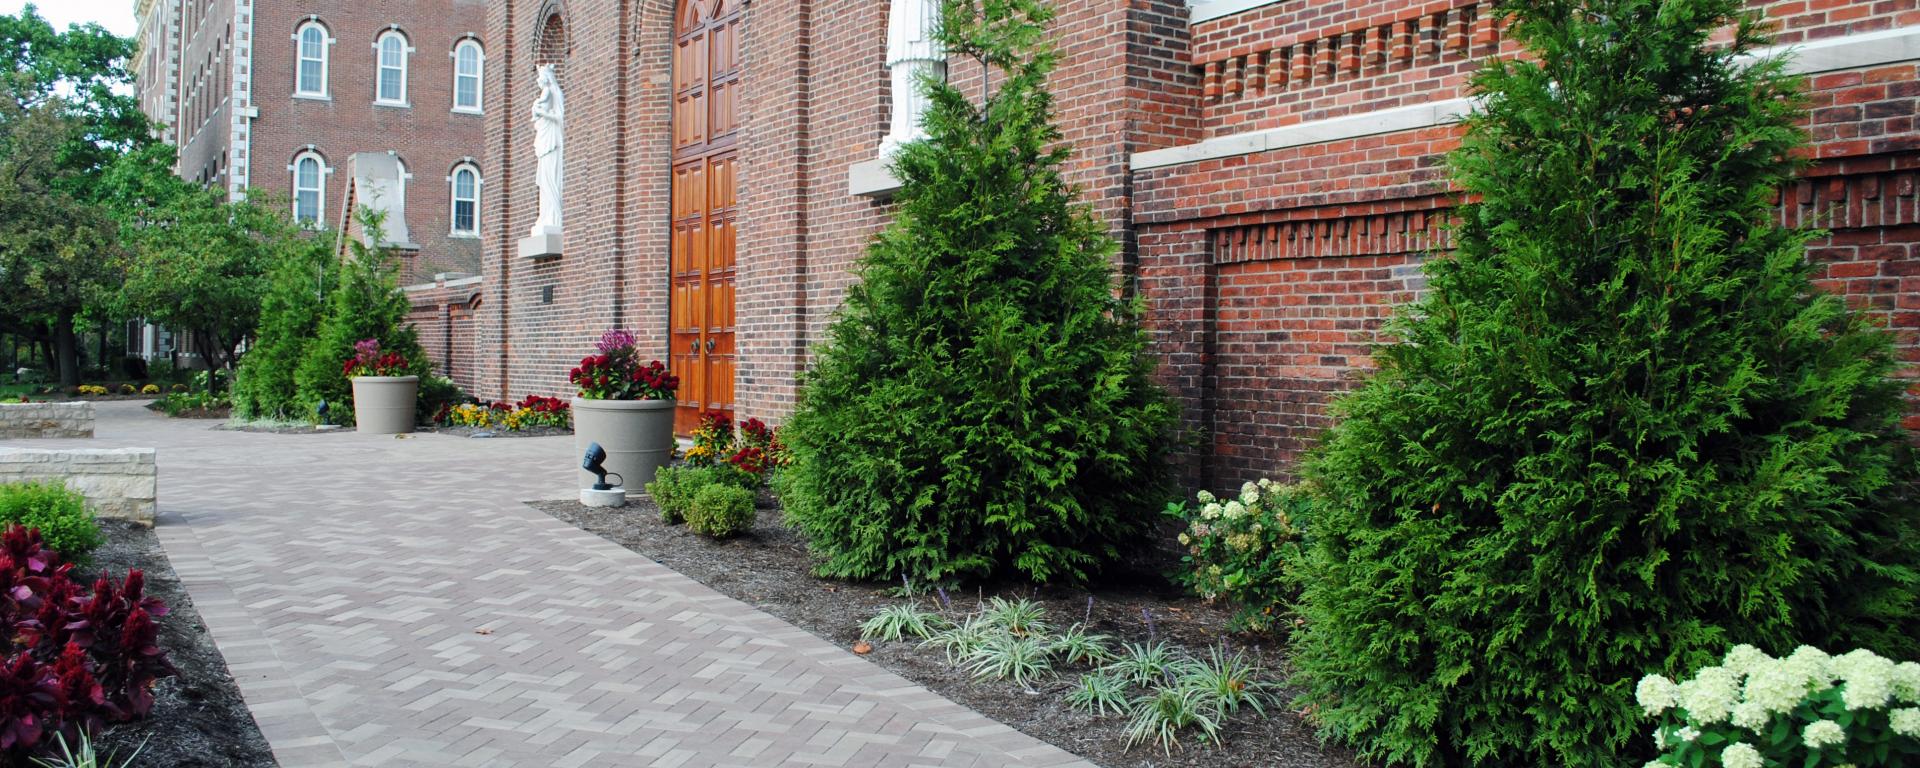 entrance and landscaping outside of chapel